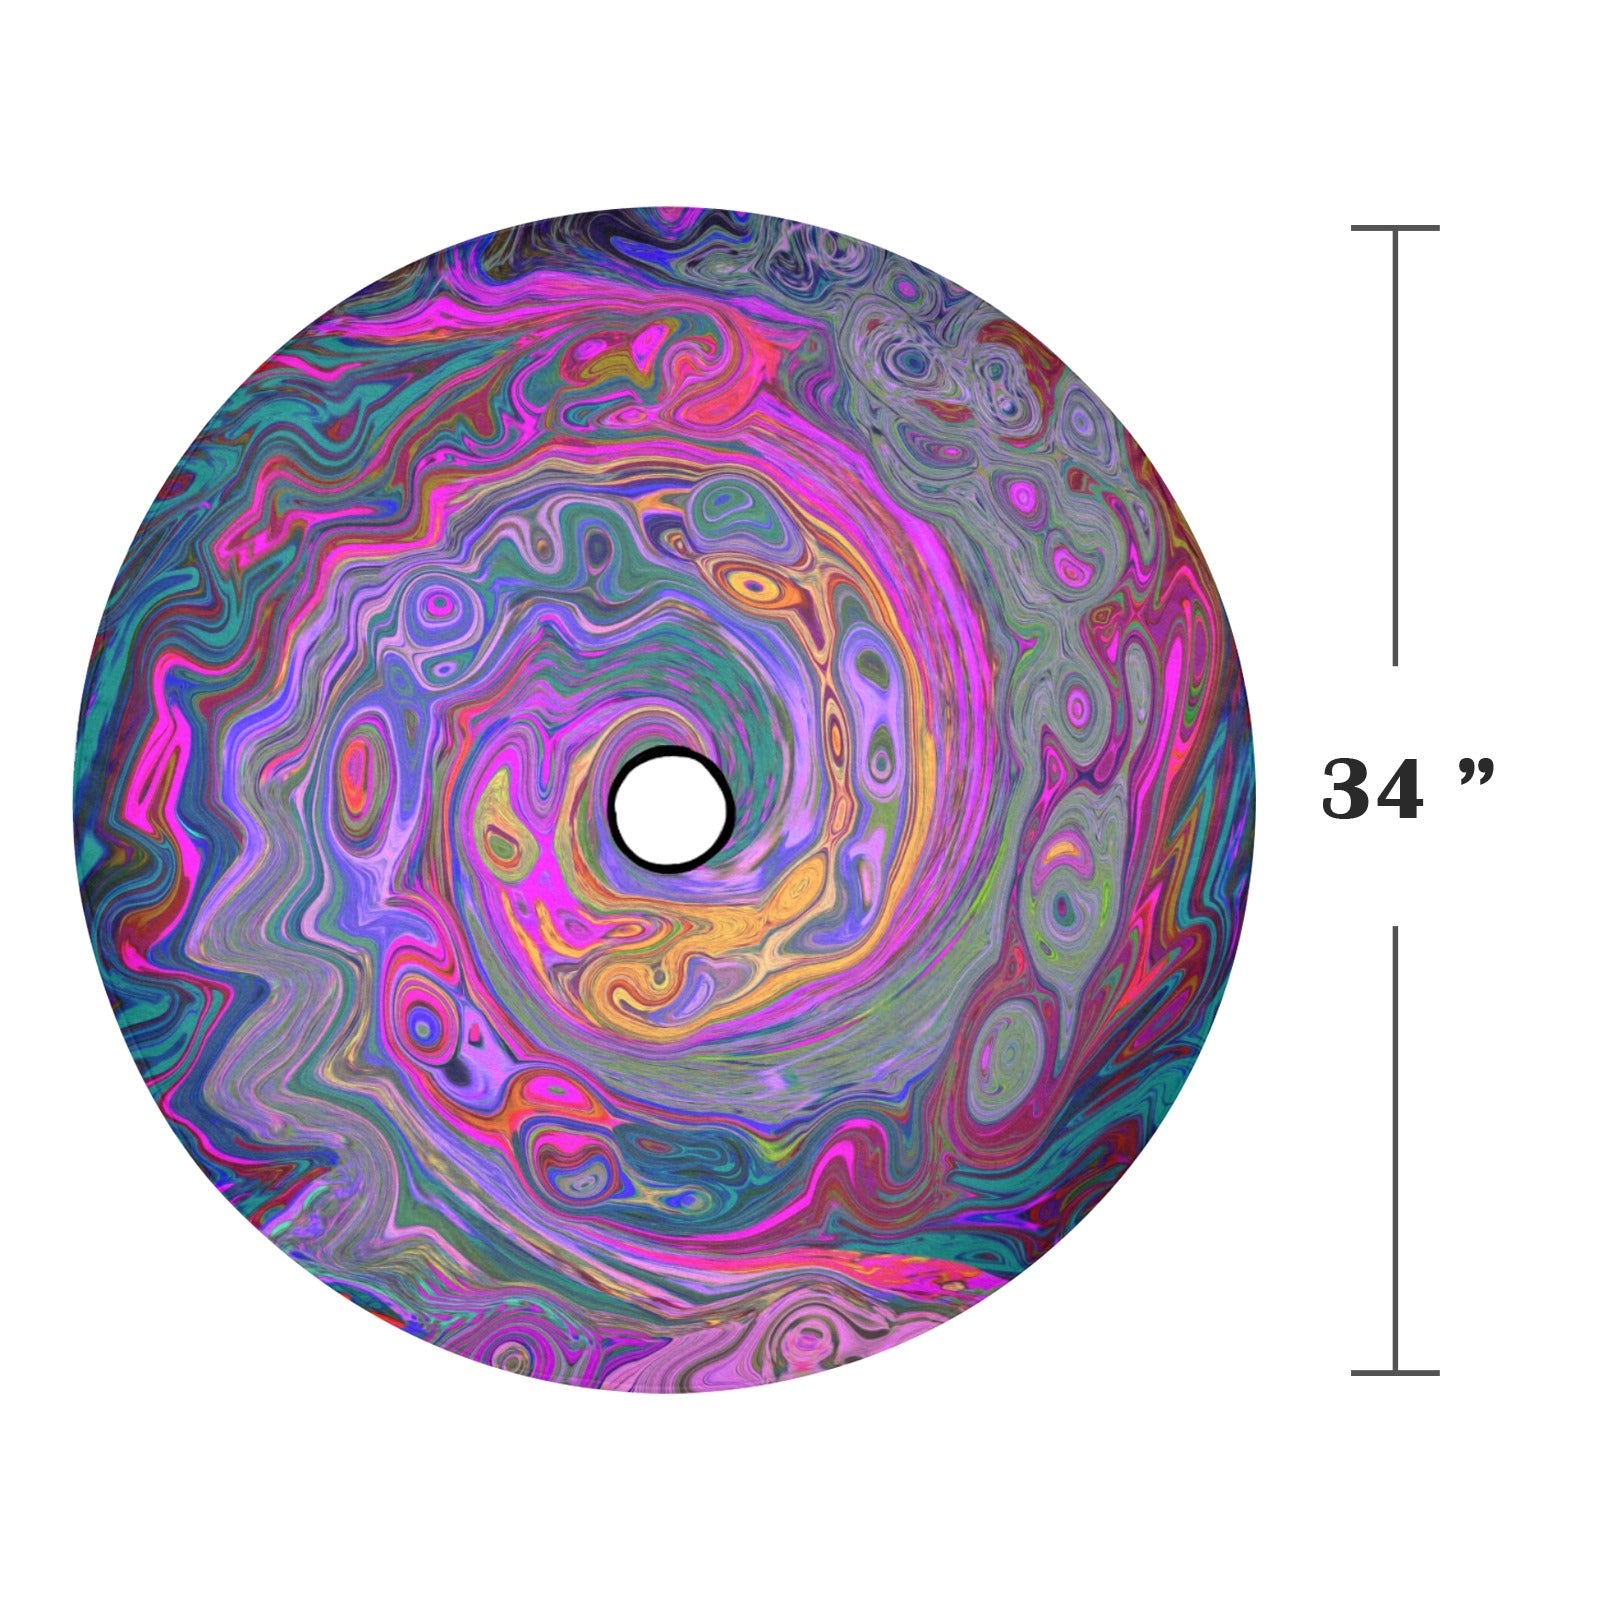 Spare Tire Cover with Backup Camera Hole - Retro Magenta, Green and Orange Abstract Swirl - Large